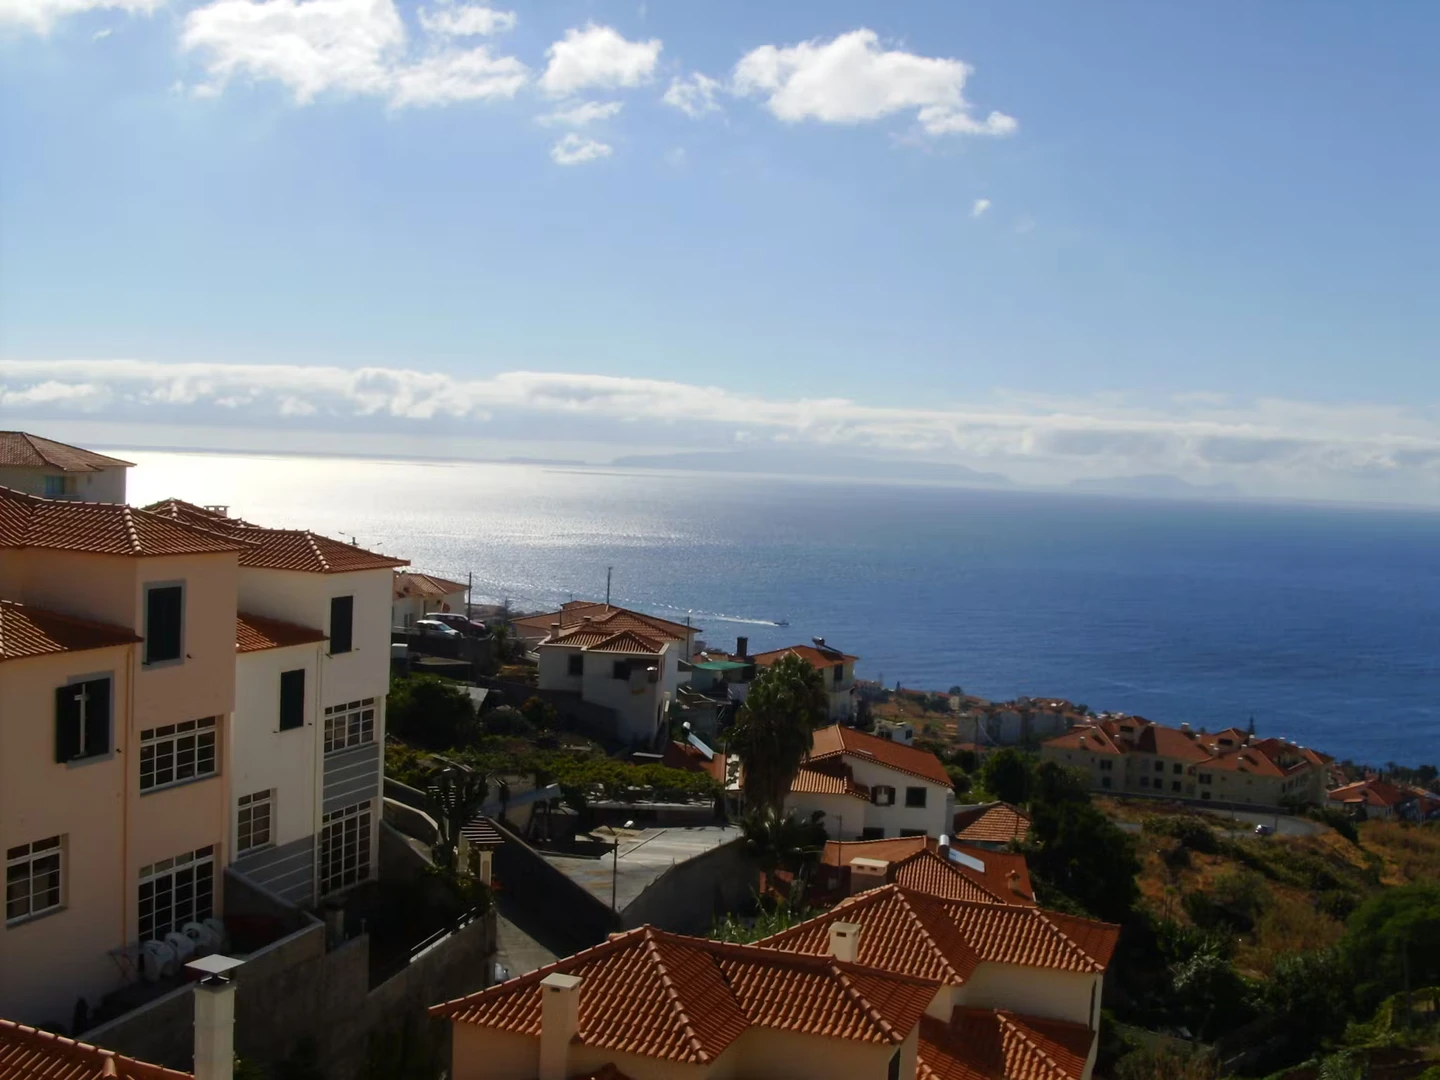 Accommodation in the centre of Madeira